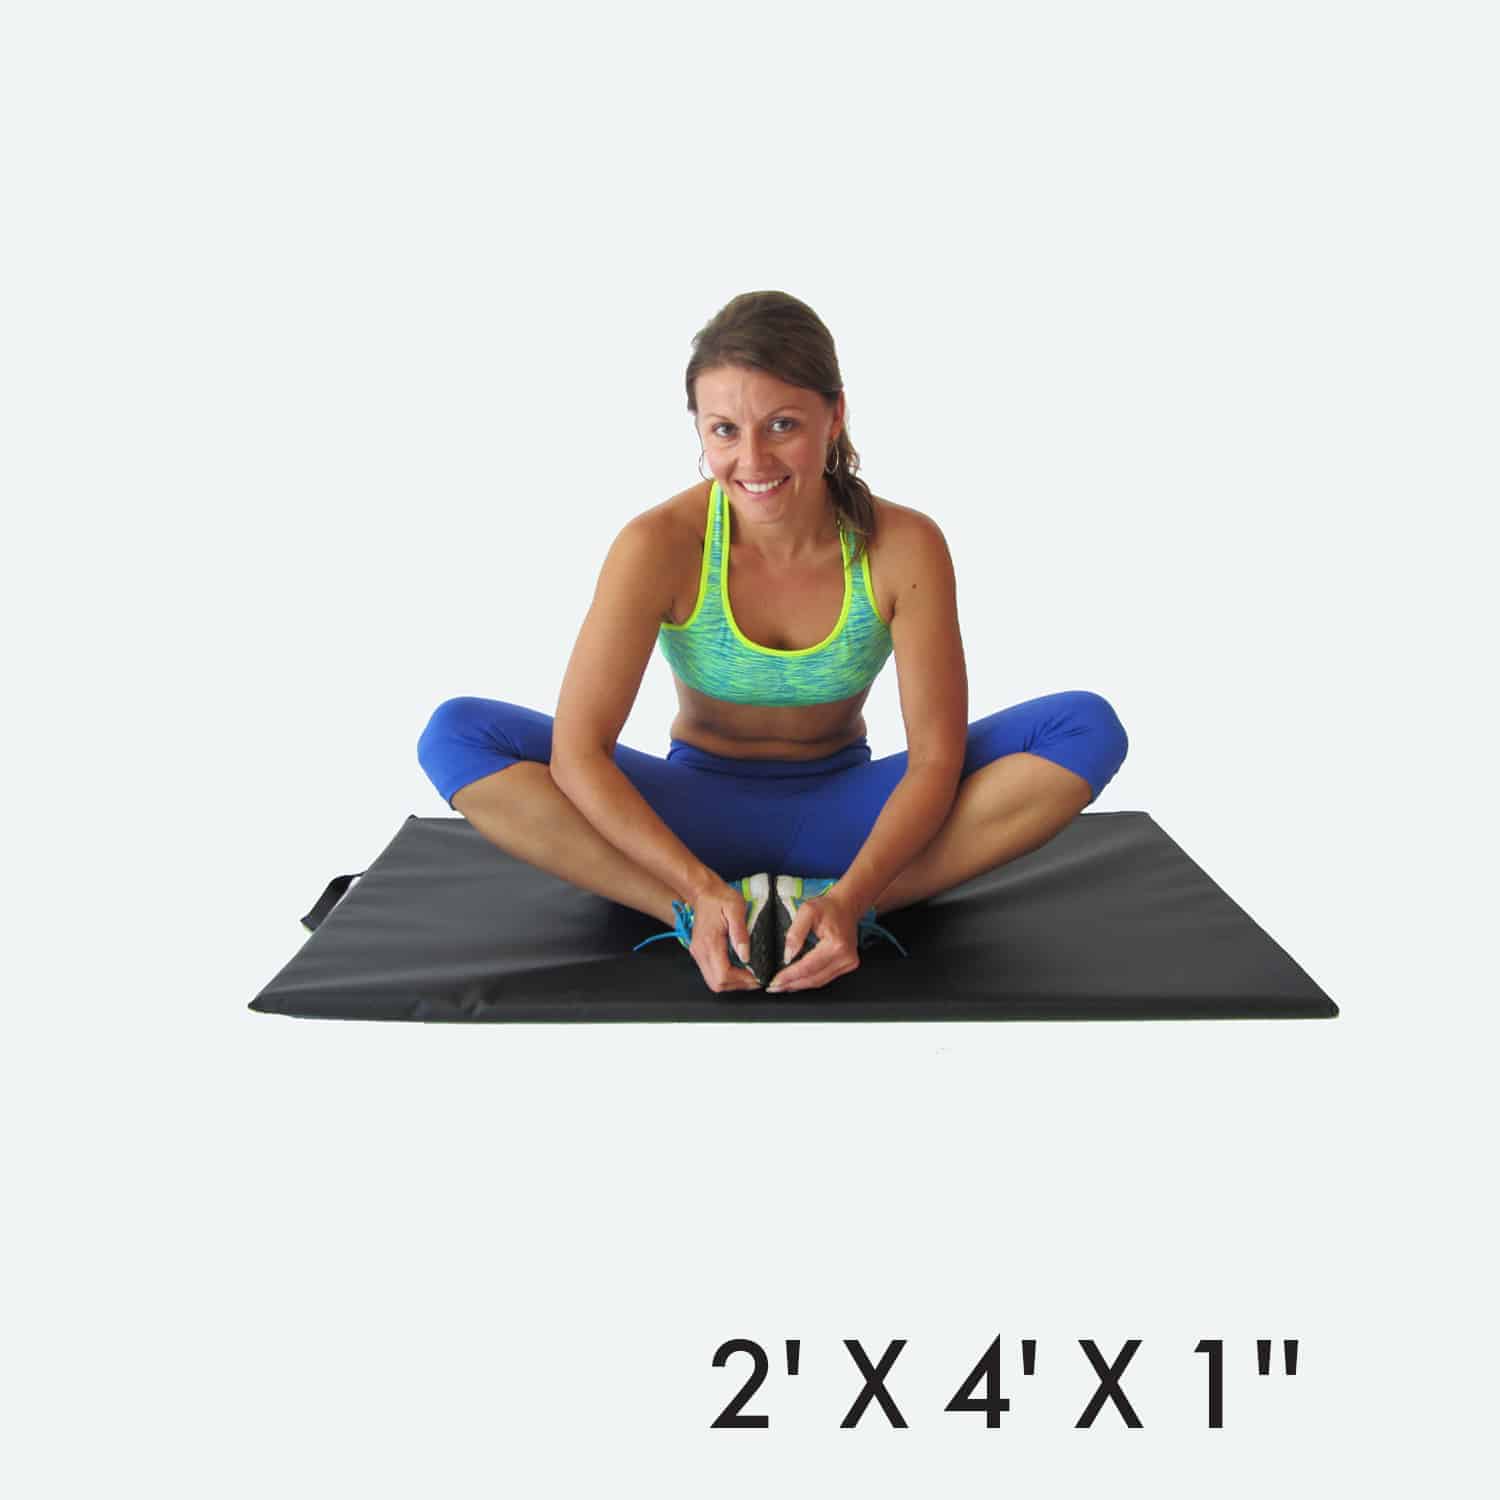 Resting/Exercise Mat